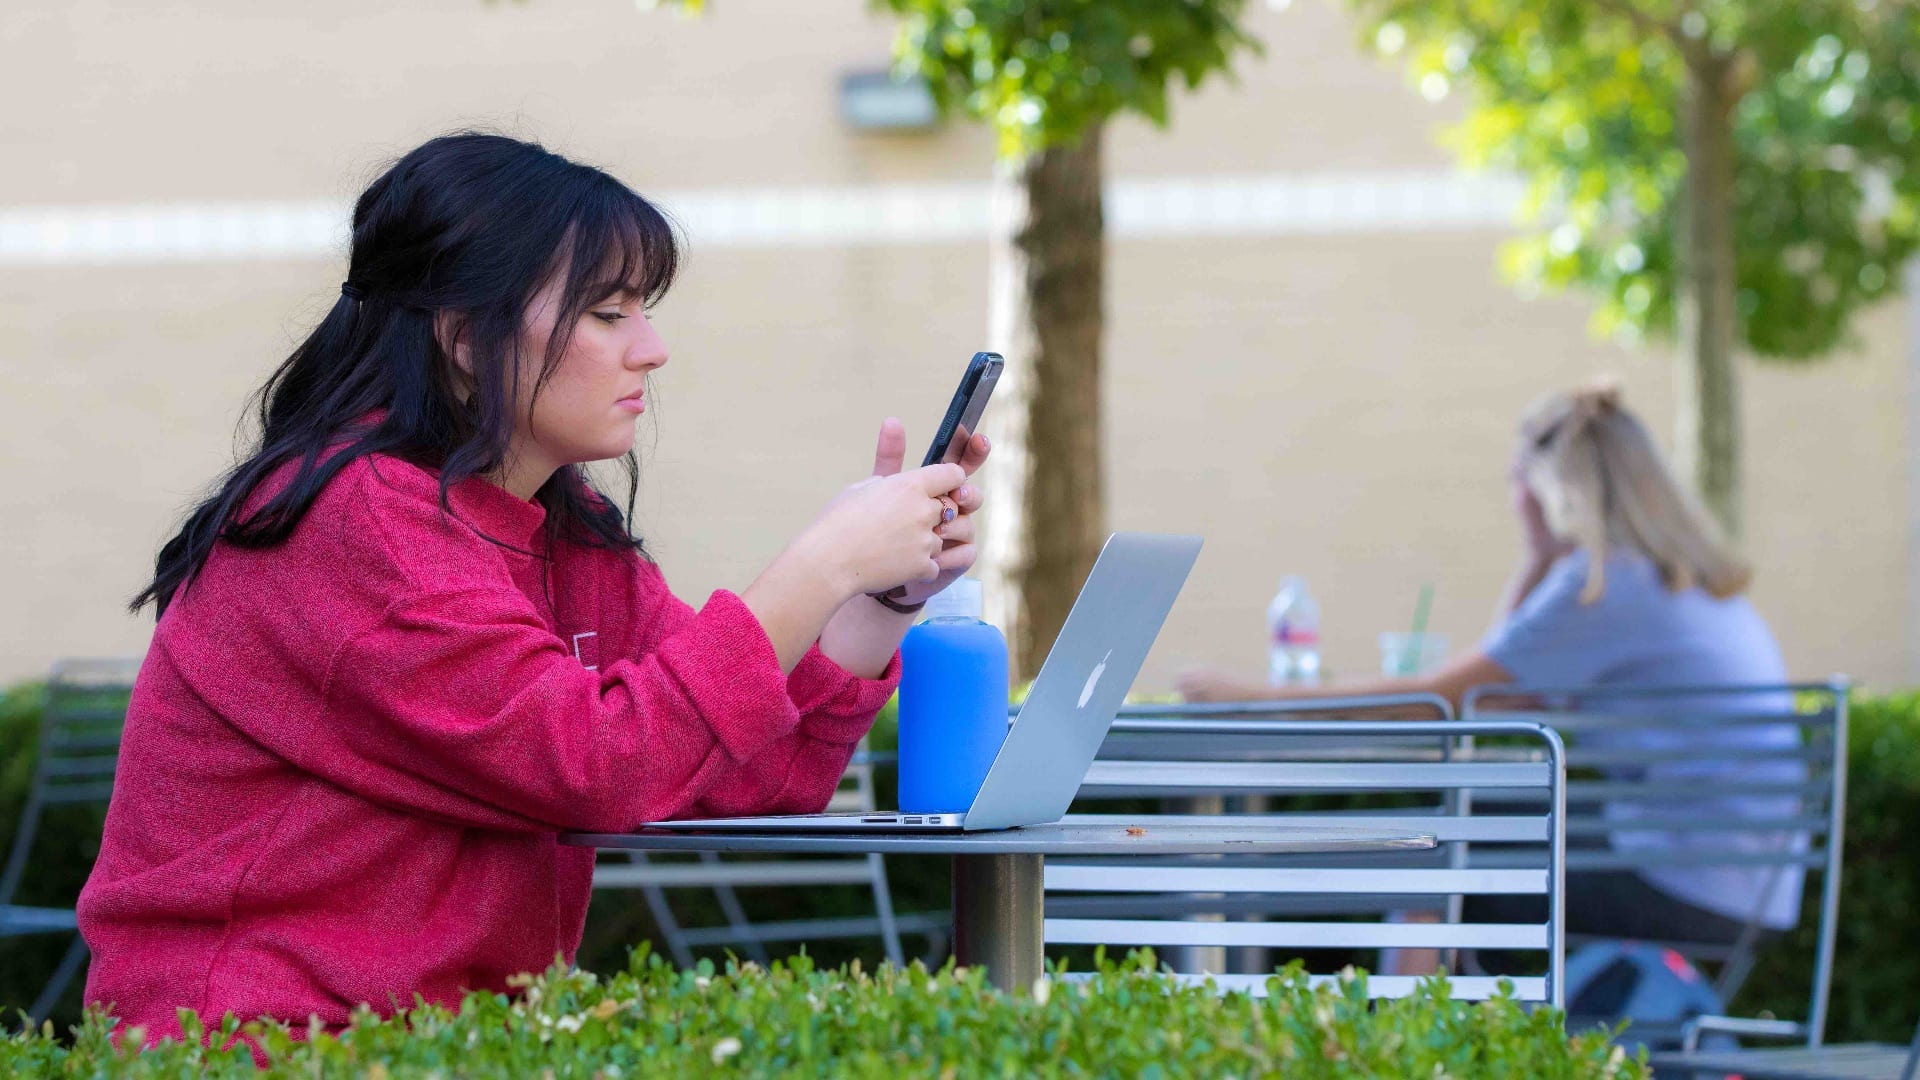 Student with Phone and Laptop